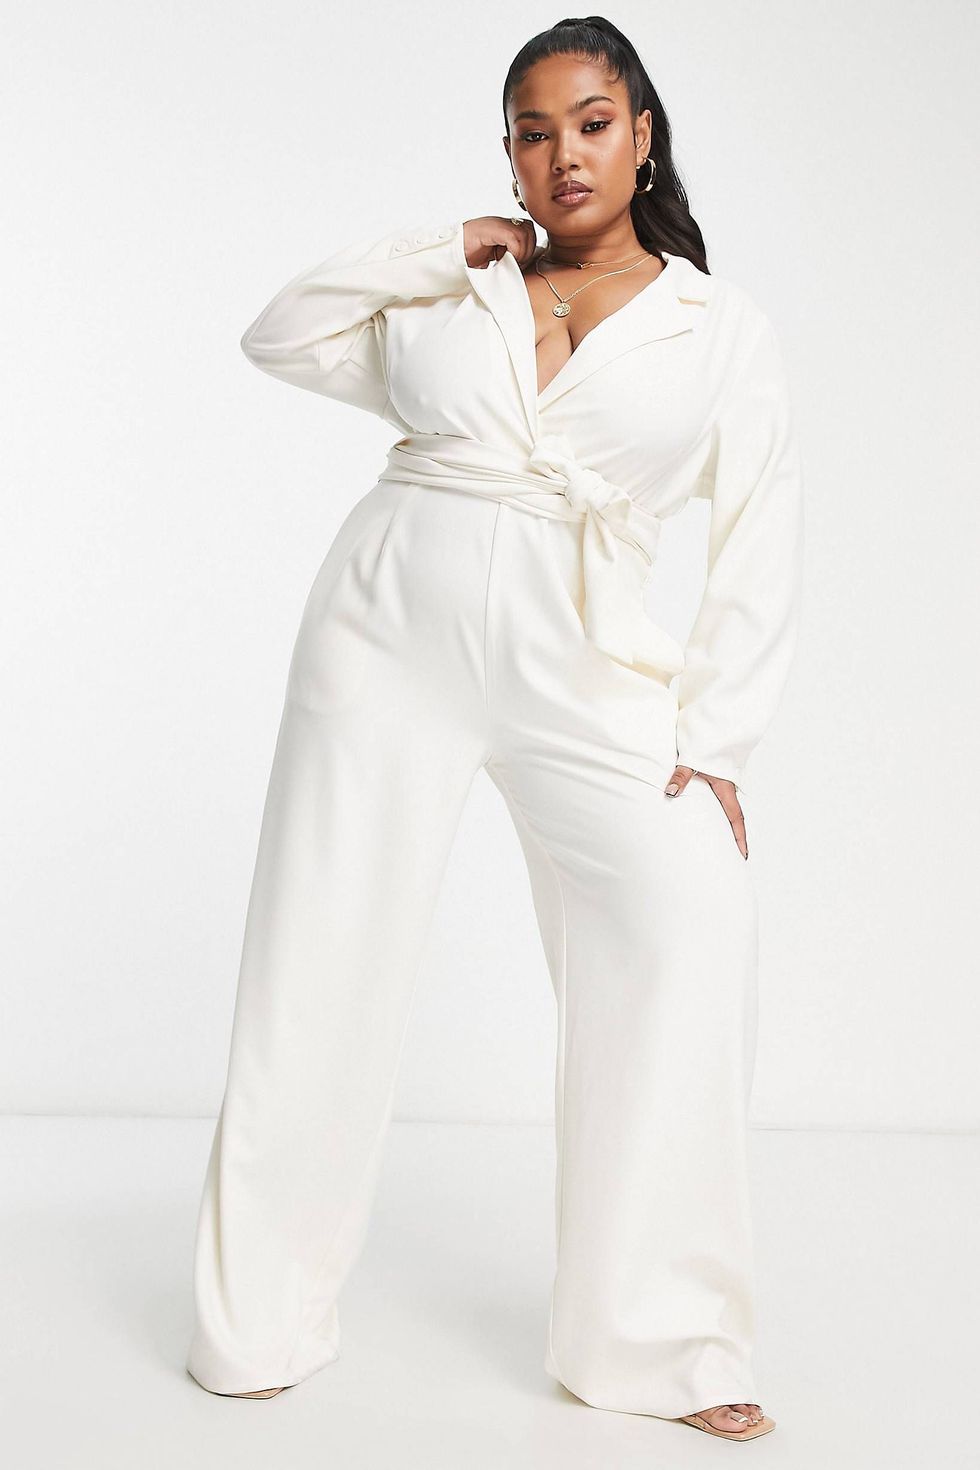 Page 7 for Plus Size Jumpsuits for Women